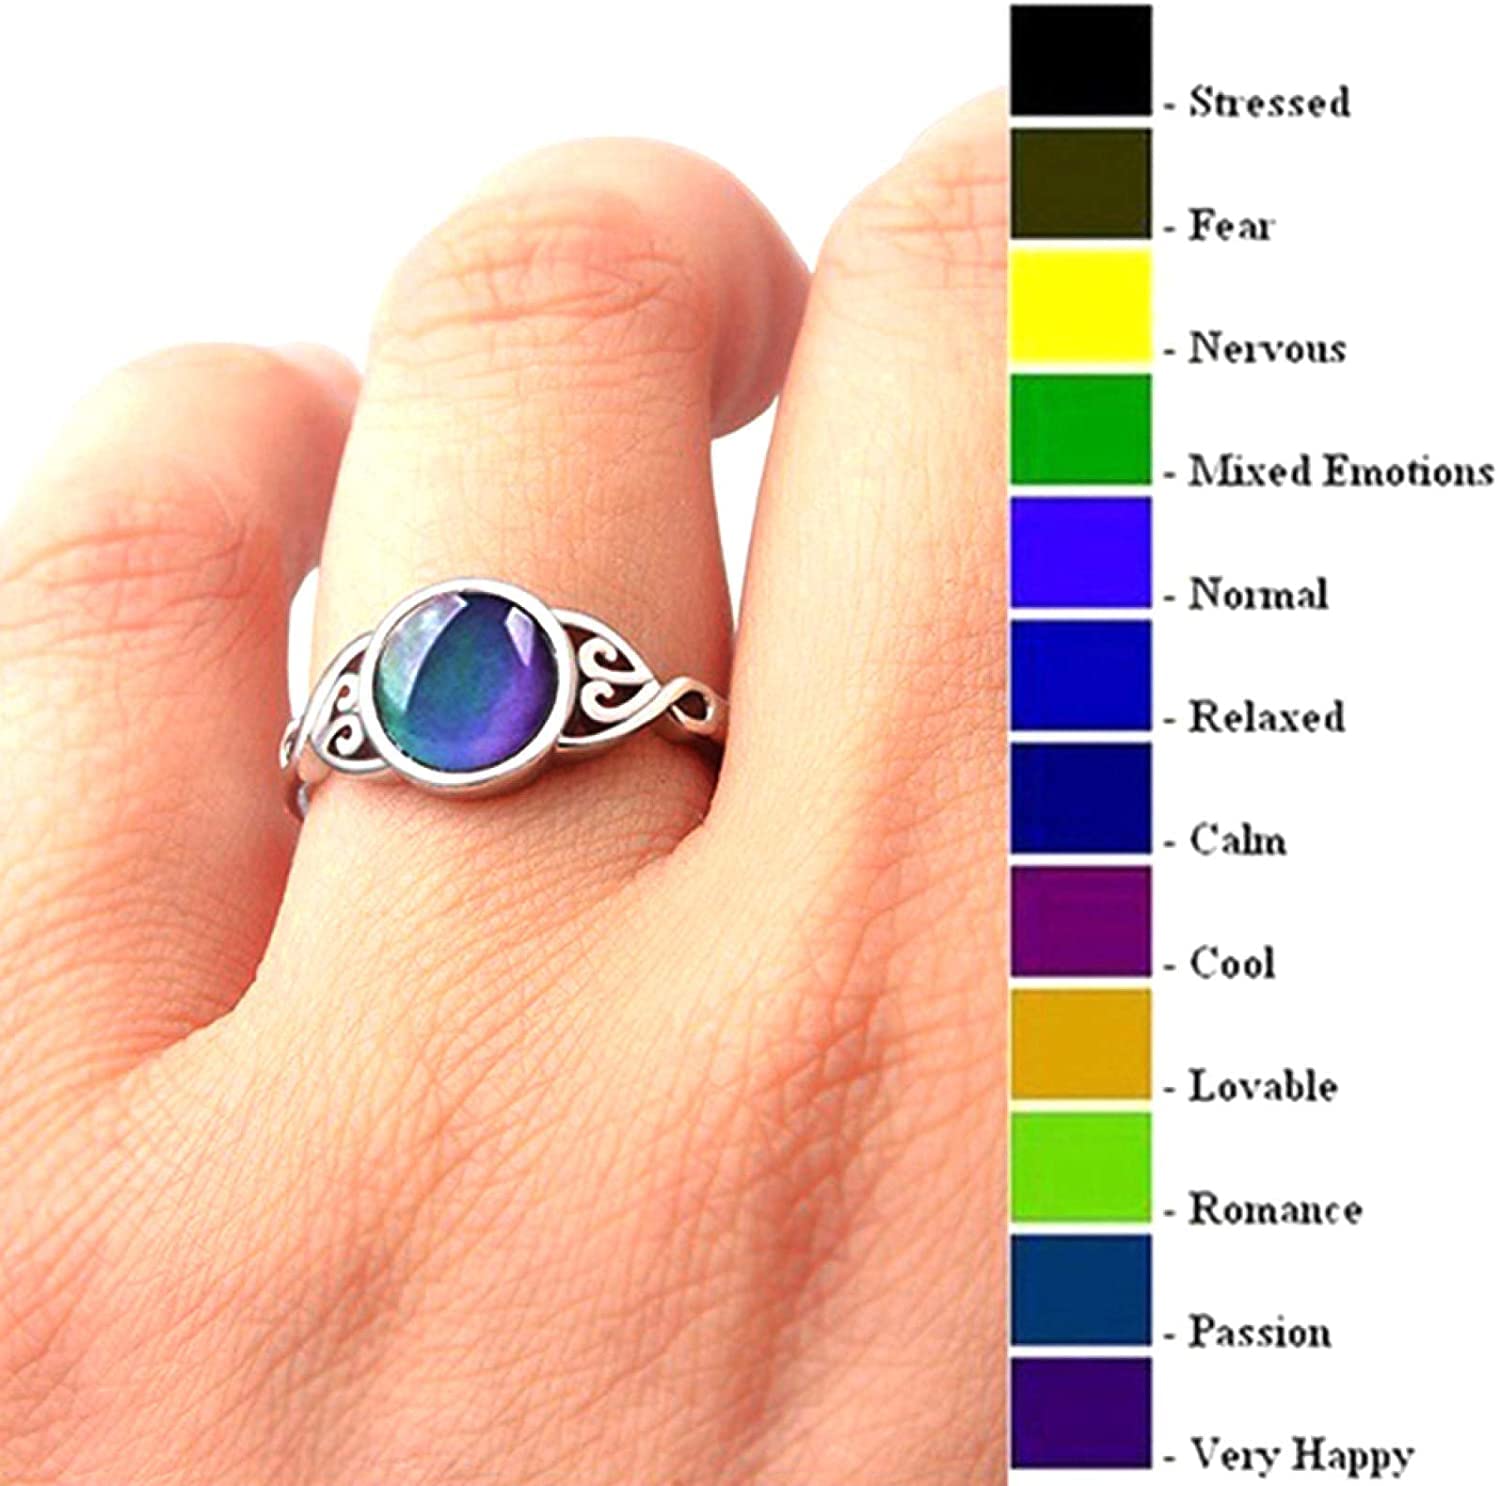 U-M Rings for Women Teen Girls,Women Round Faux Gem Inlaid Hollow Temperature Change Color Mood Ring Jewelry, Gifts for Women Men Girl